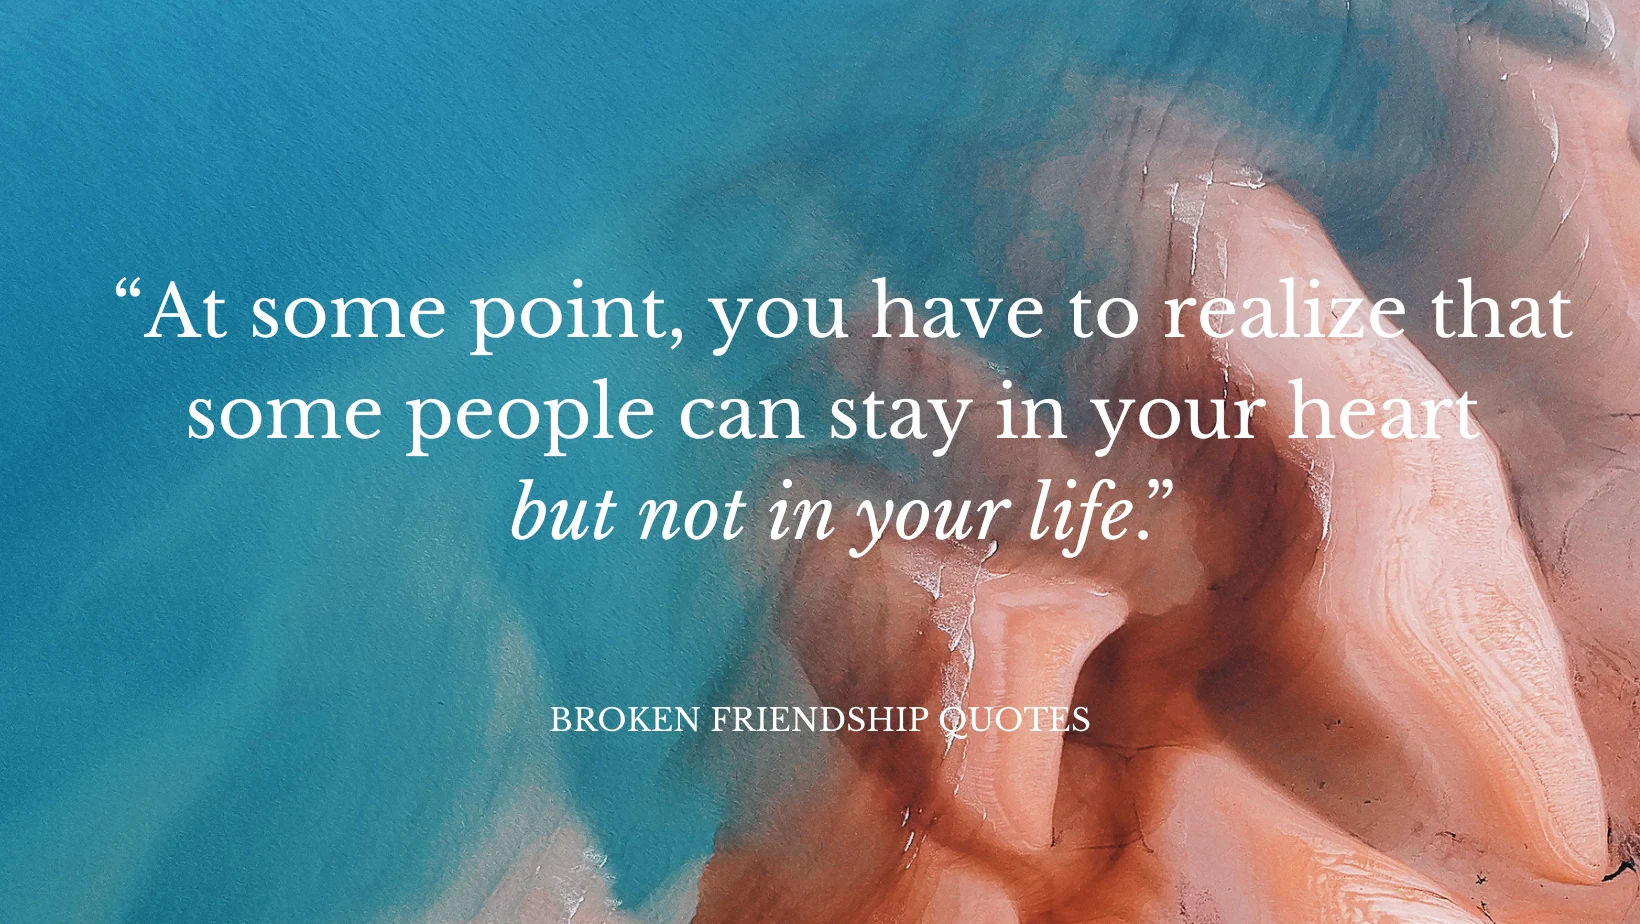 28 Broken Friendship Quotes That Will Hit You Right In The Heart